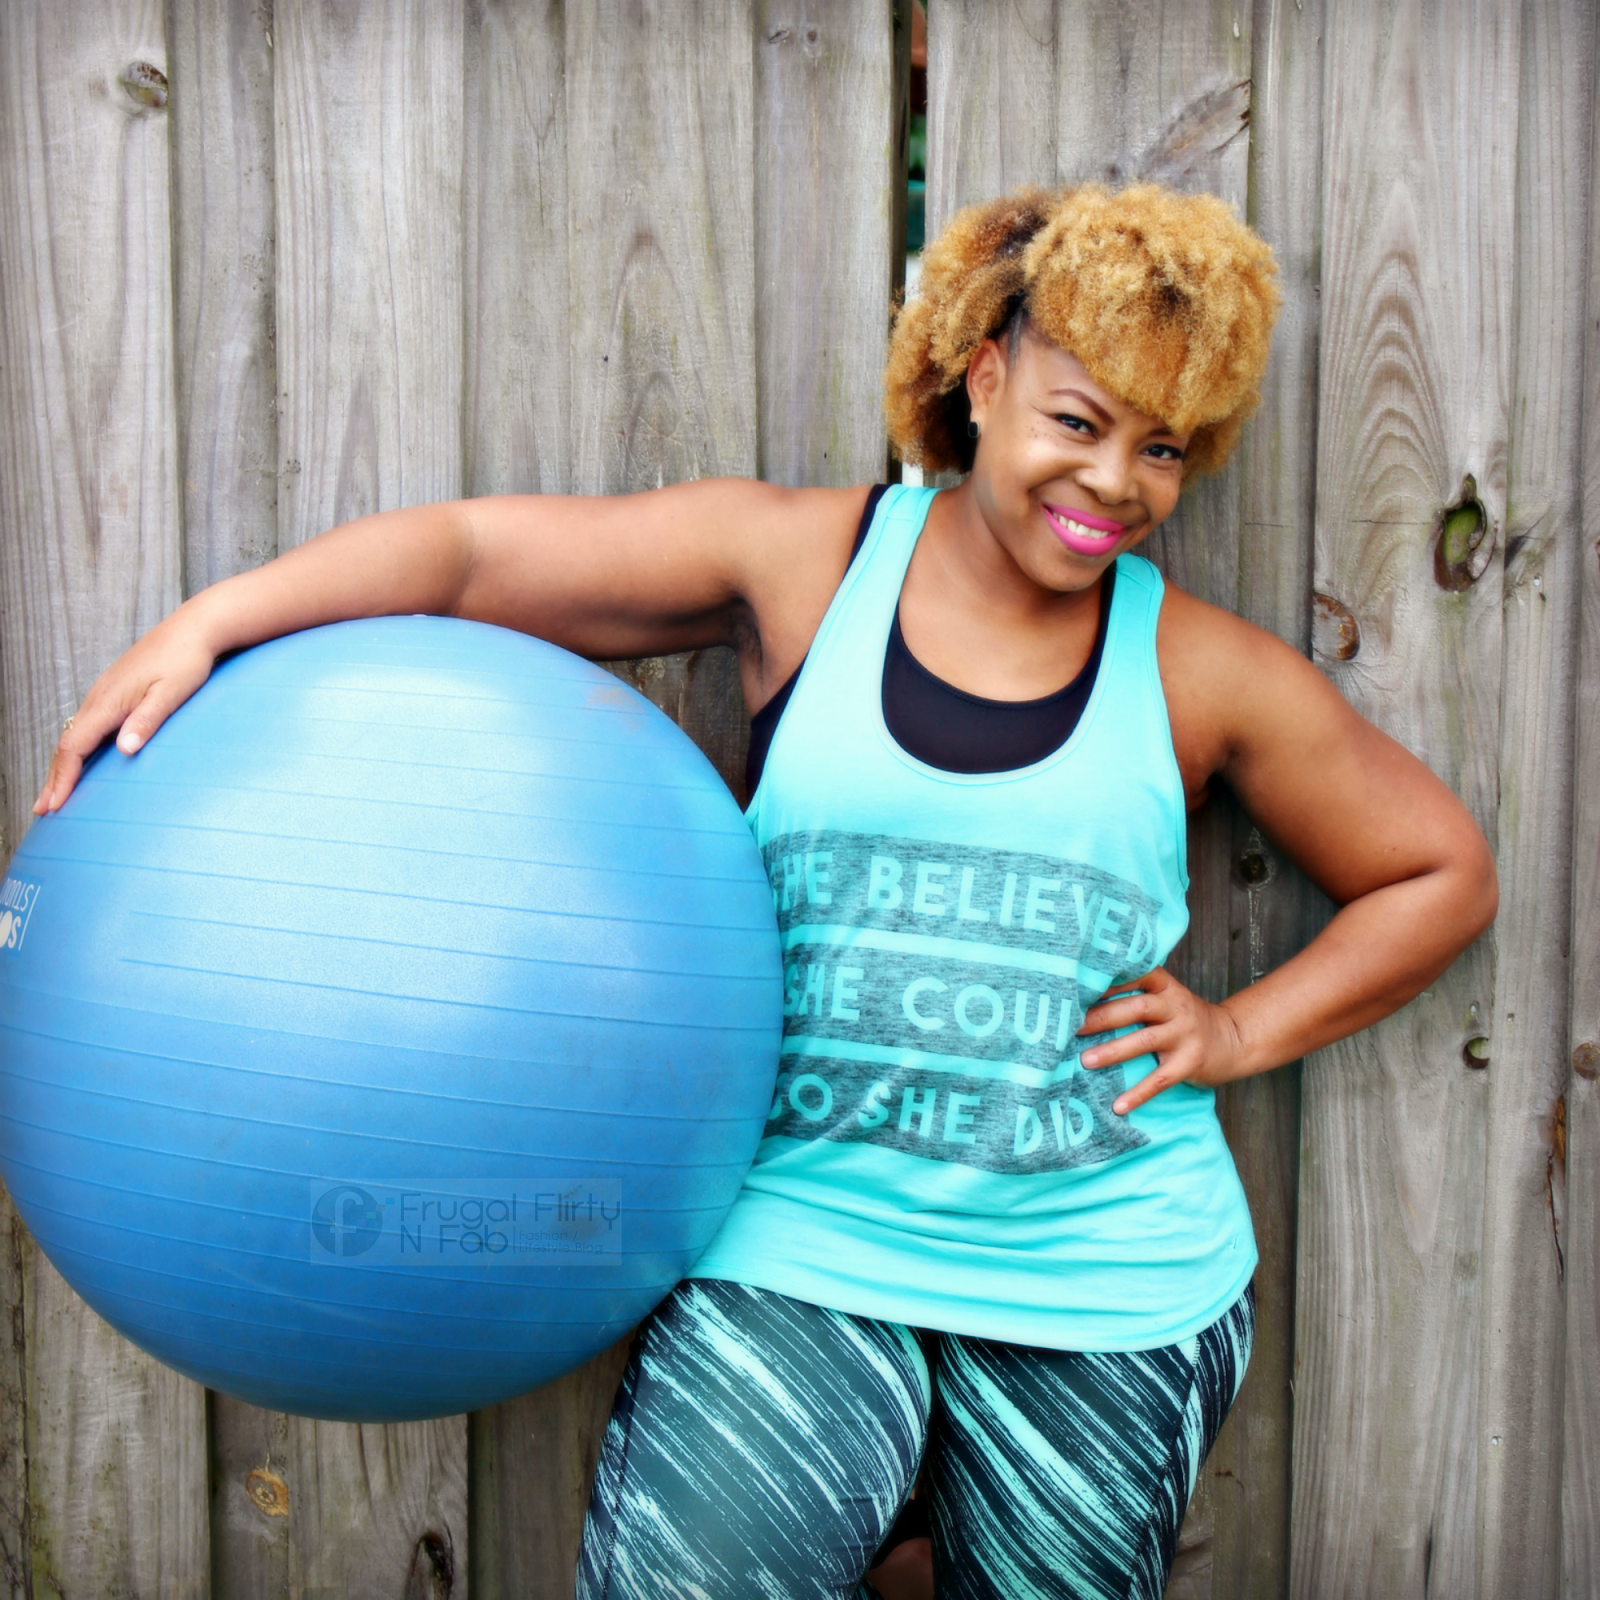 Why Stylish Moms choose Sears ActiveWear